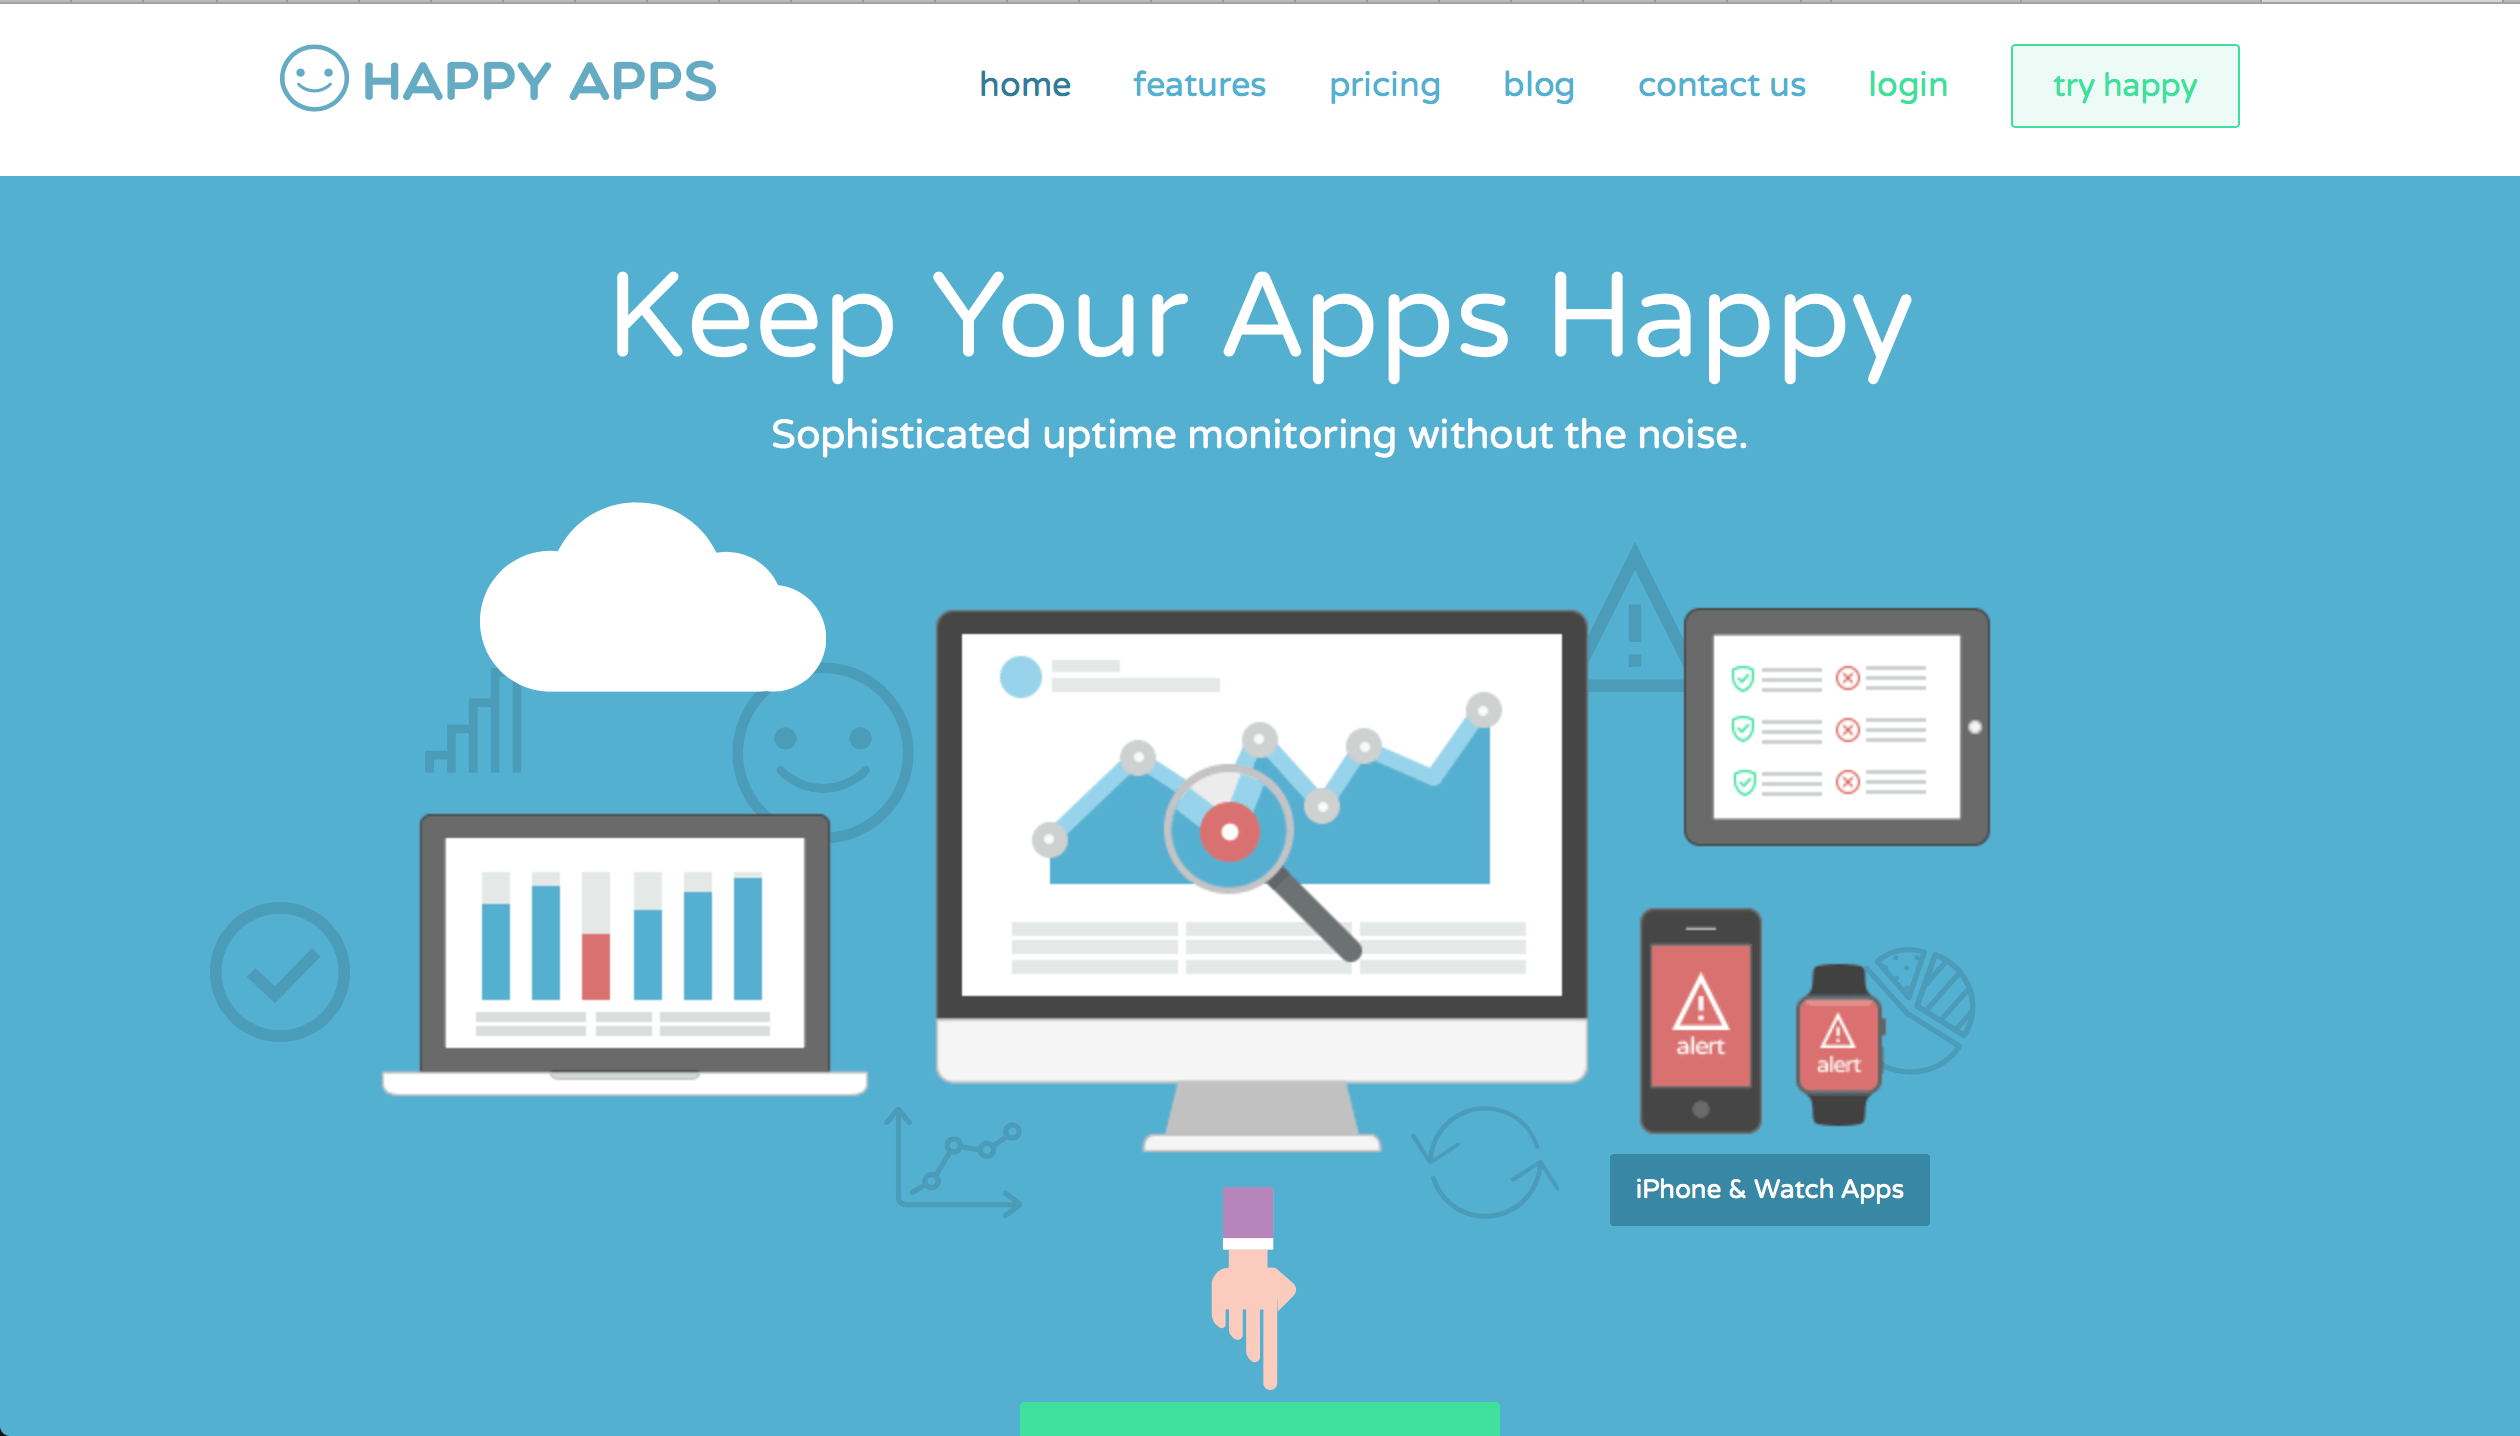 Happy apps dịch vụ giám sát uptime/downtime.